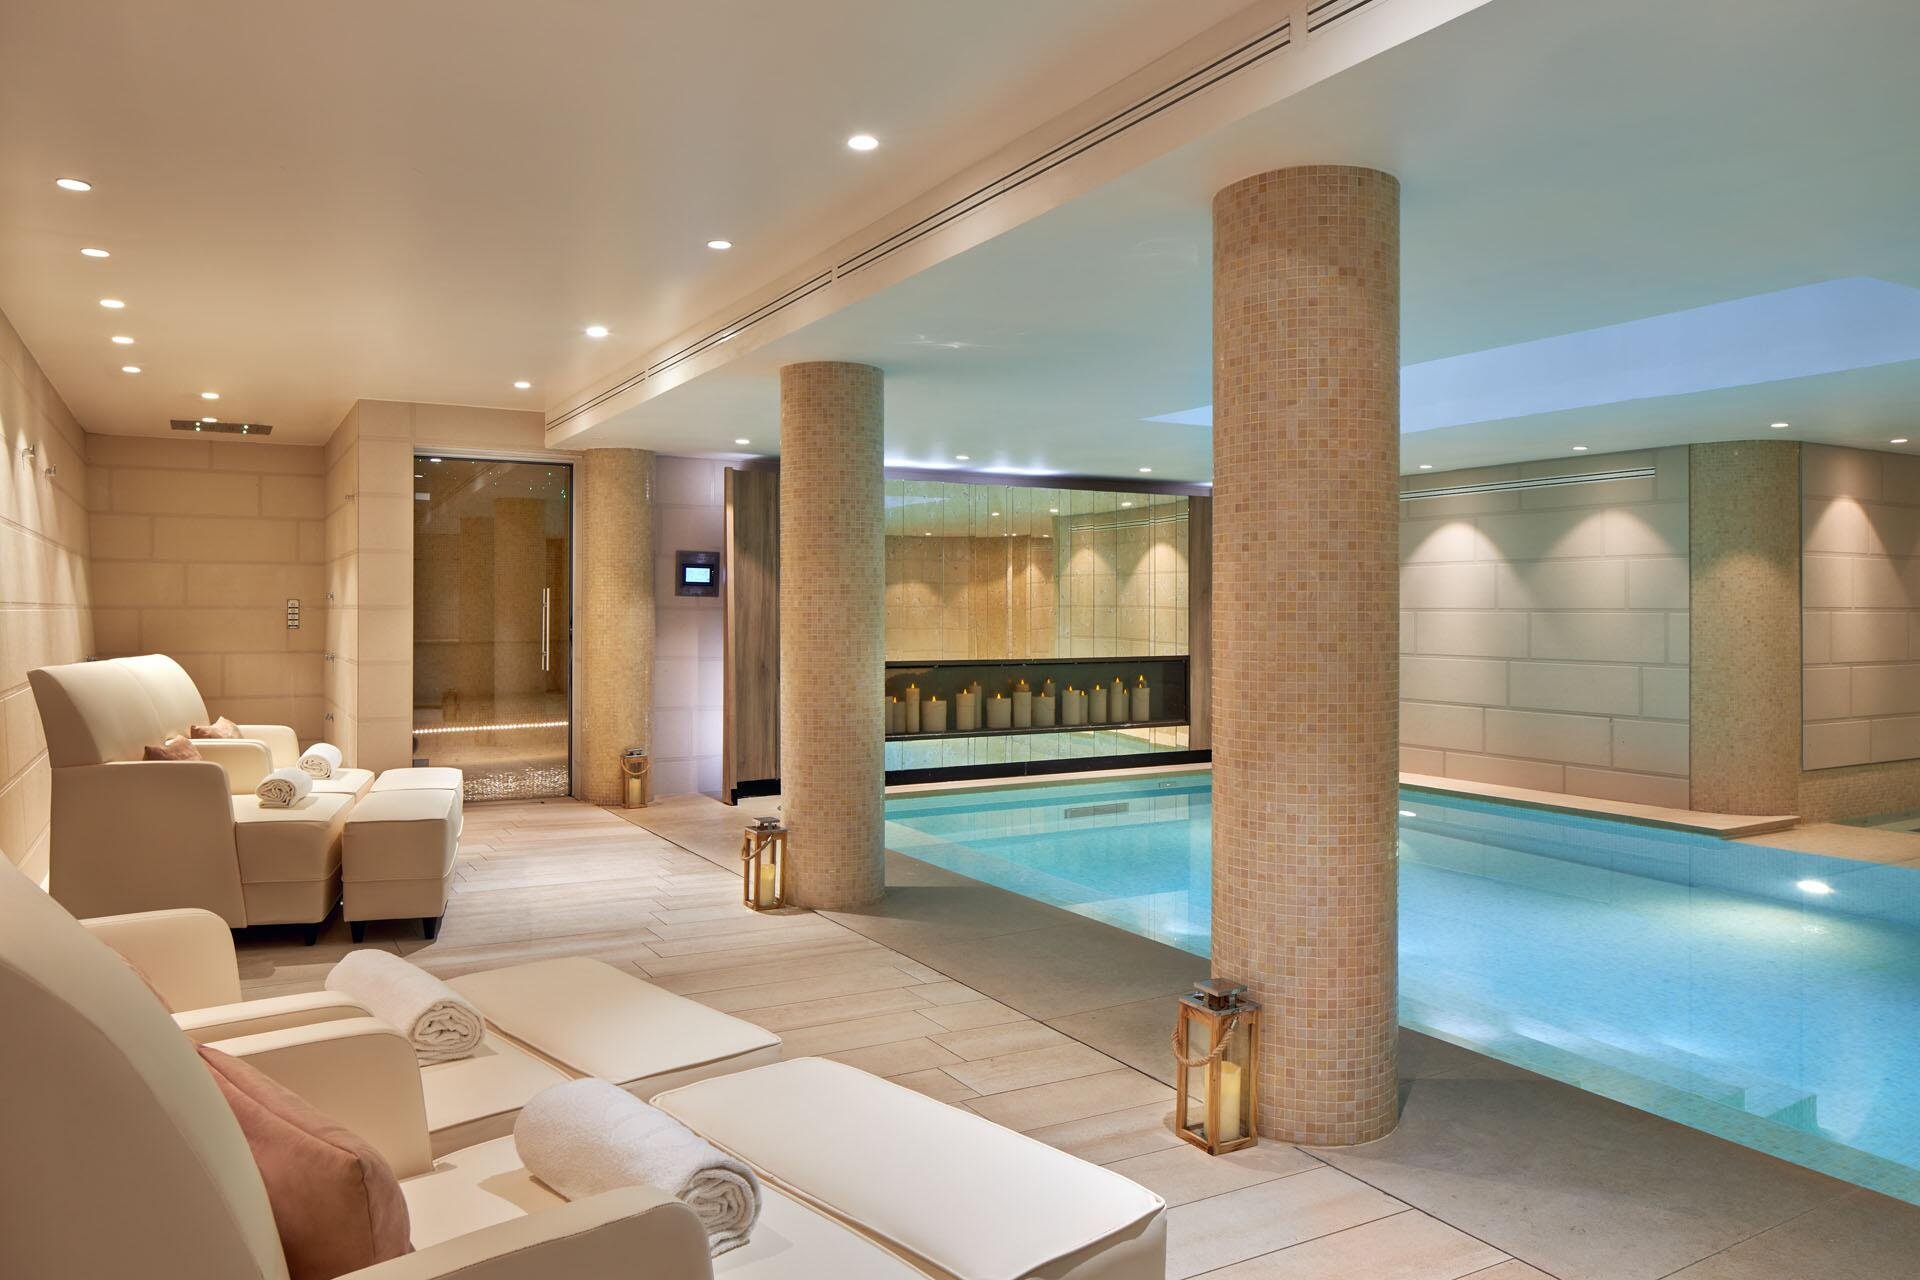 Maison Albar Hotels Le Pont-Neuf indoor swimming pool Spa Pont-Neuf by Cinq Mondes